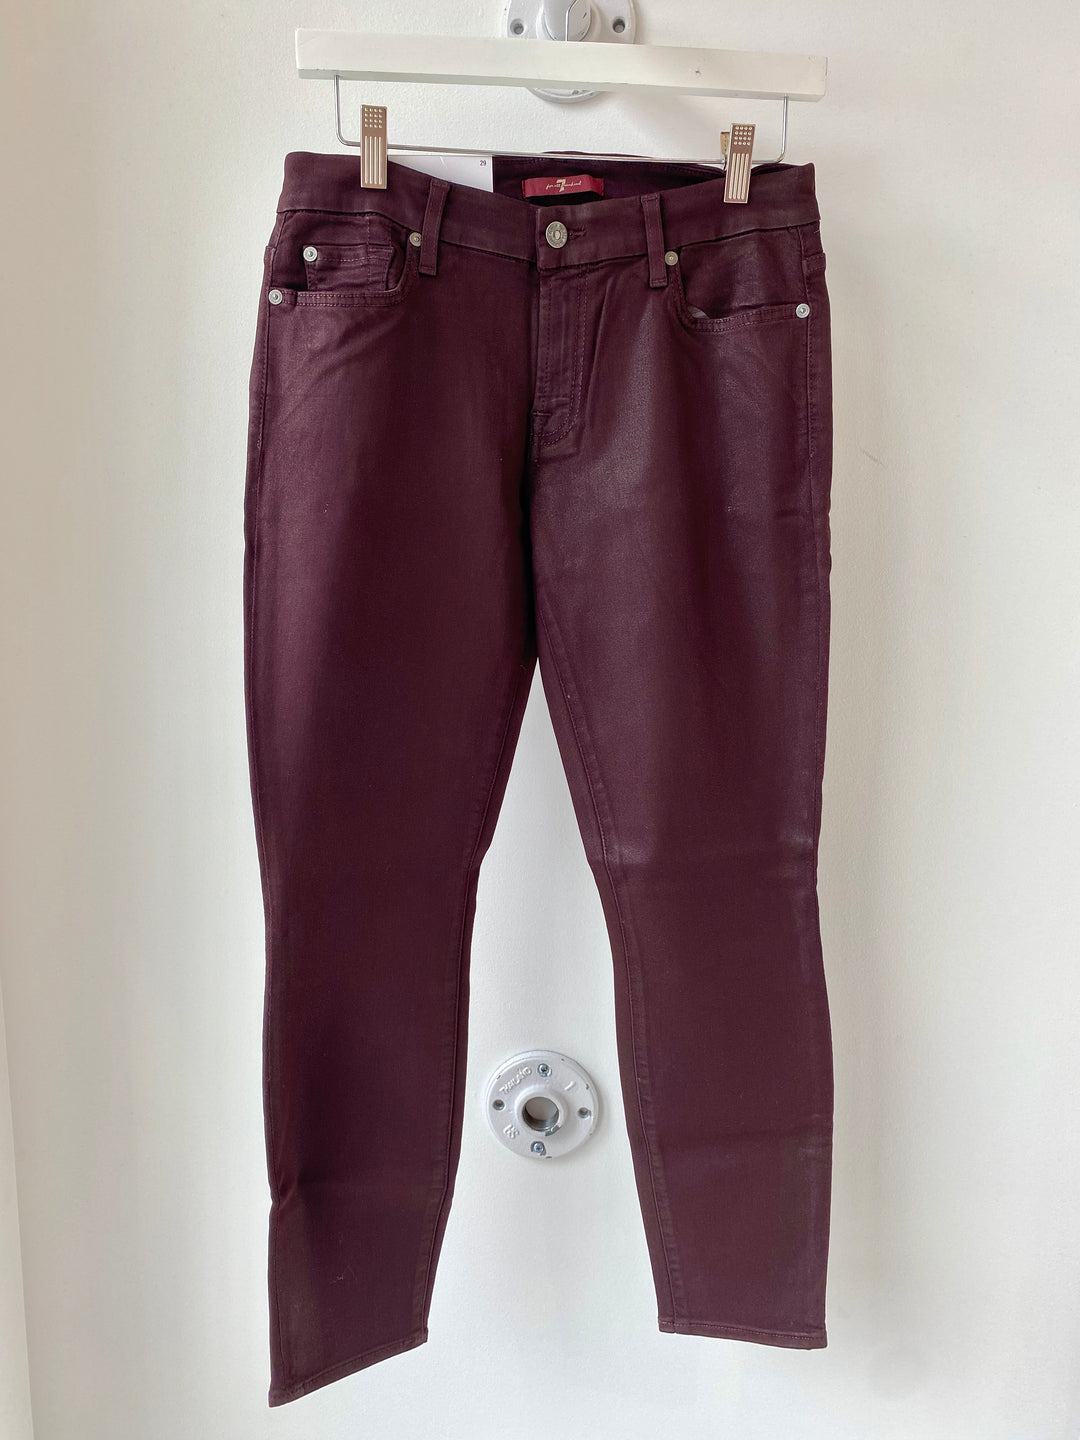 7 for all Mankind - The Ankle Skinny in Plum Coated Denim Jeans